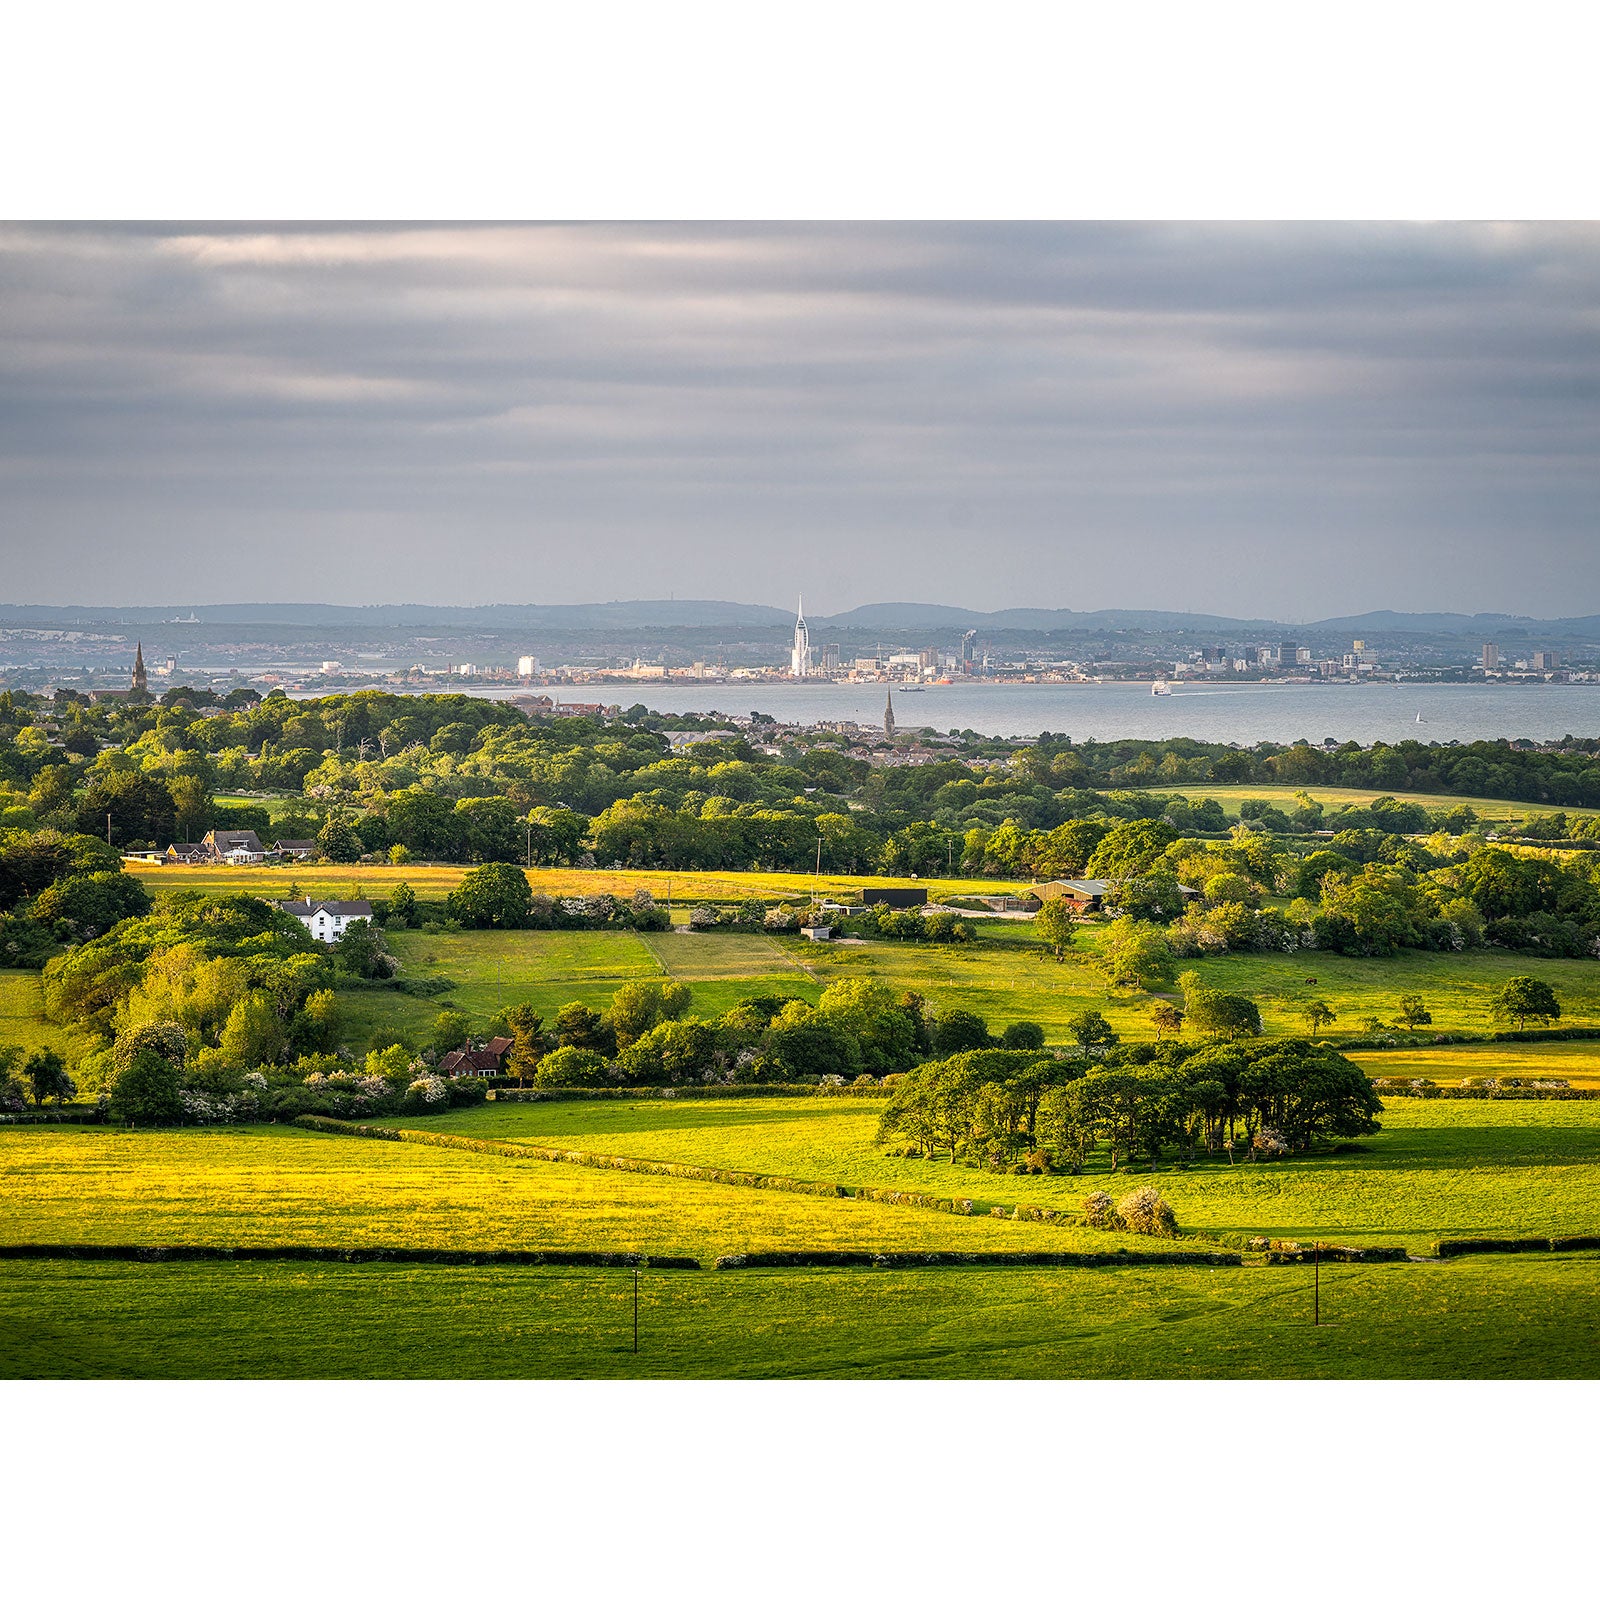 Lush green fields in the foreground with a river and Gascoigne industrial city skyline in the distance under a cloudy sky, captured in the "View from Ashey Down" by Available Light Photography.